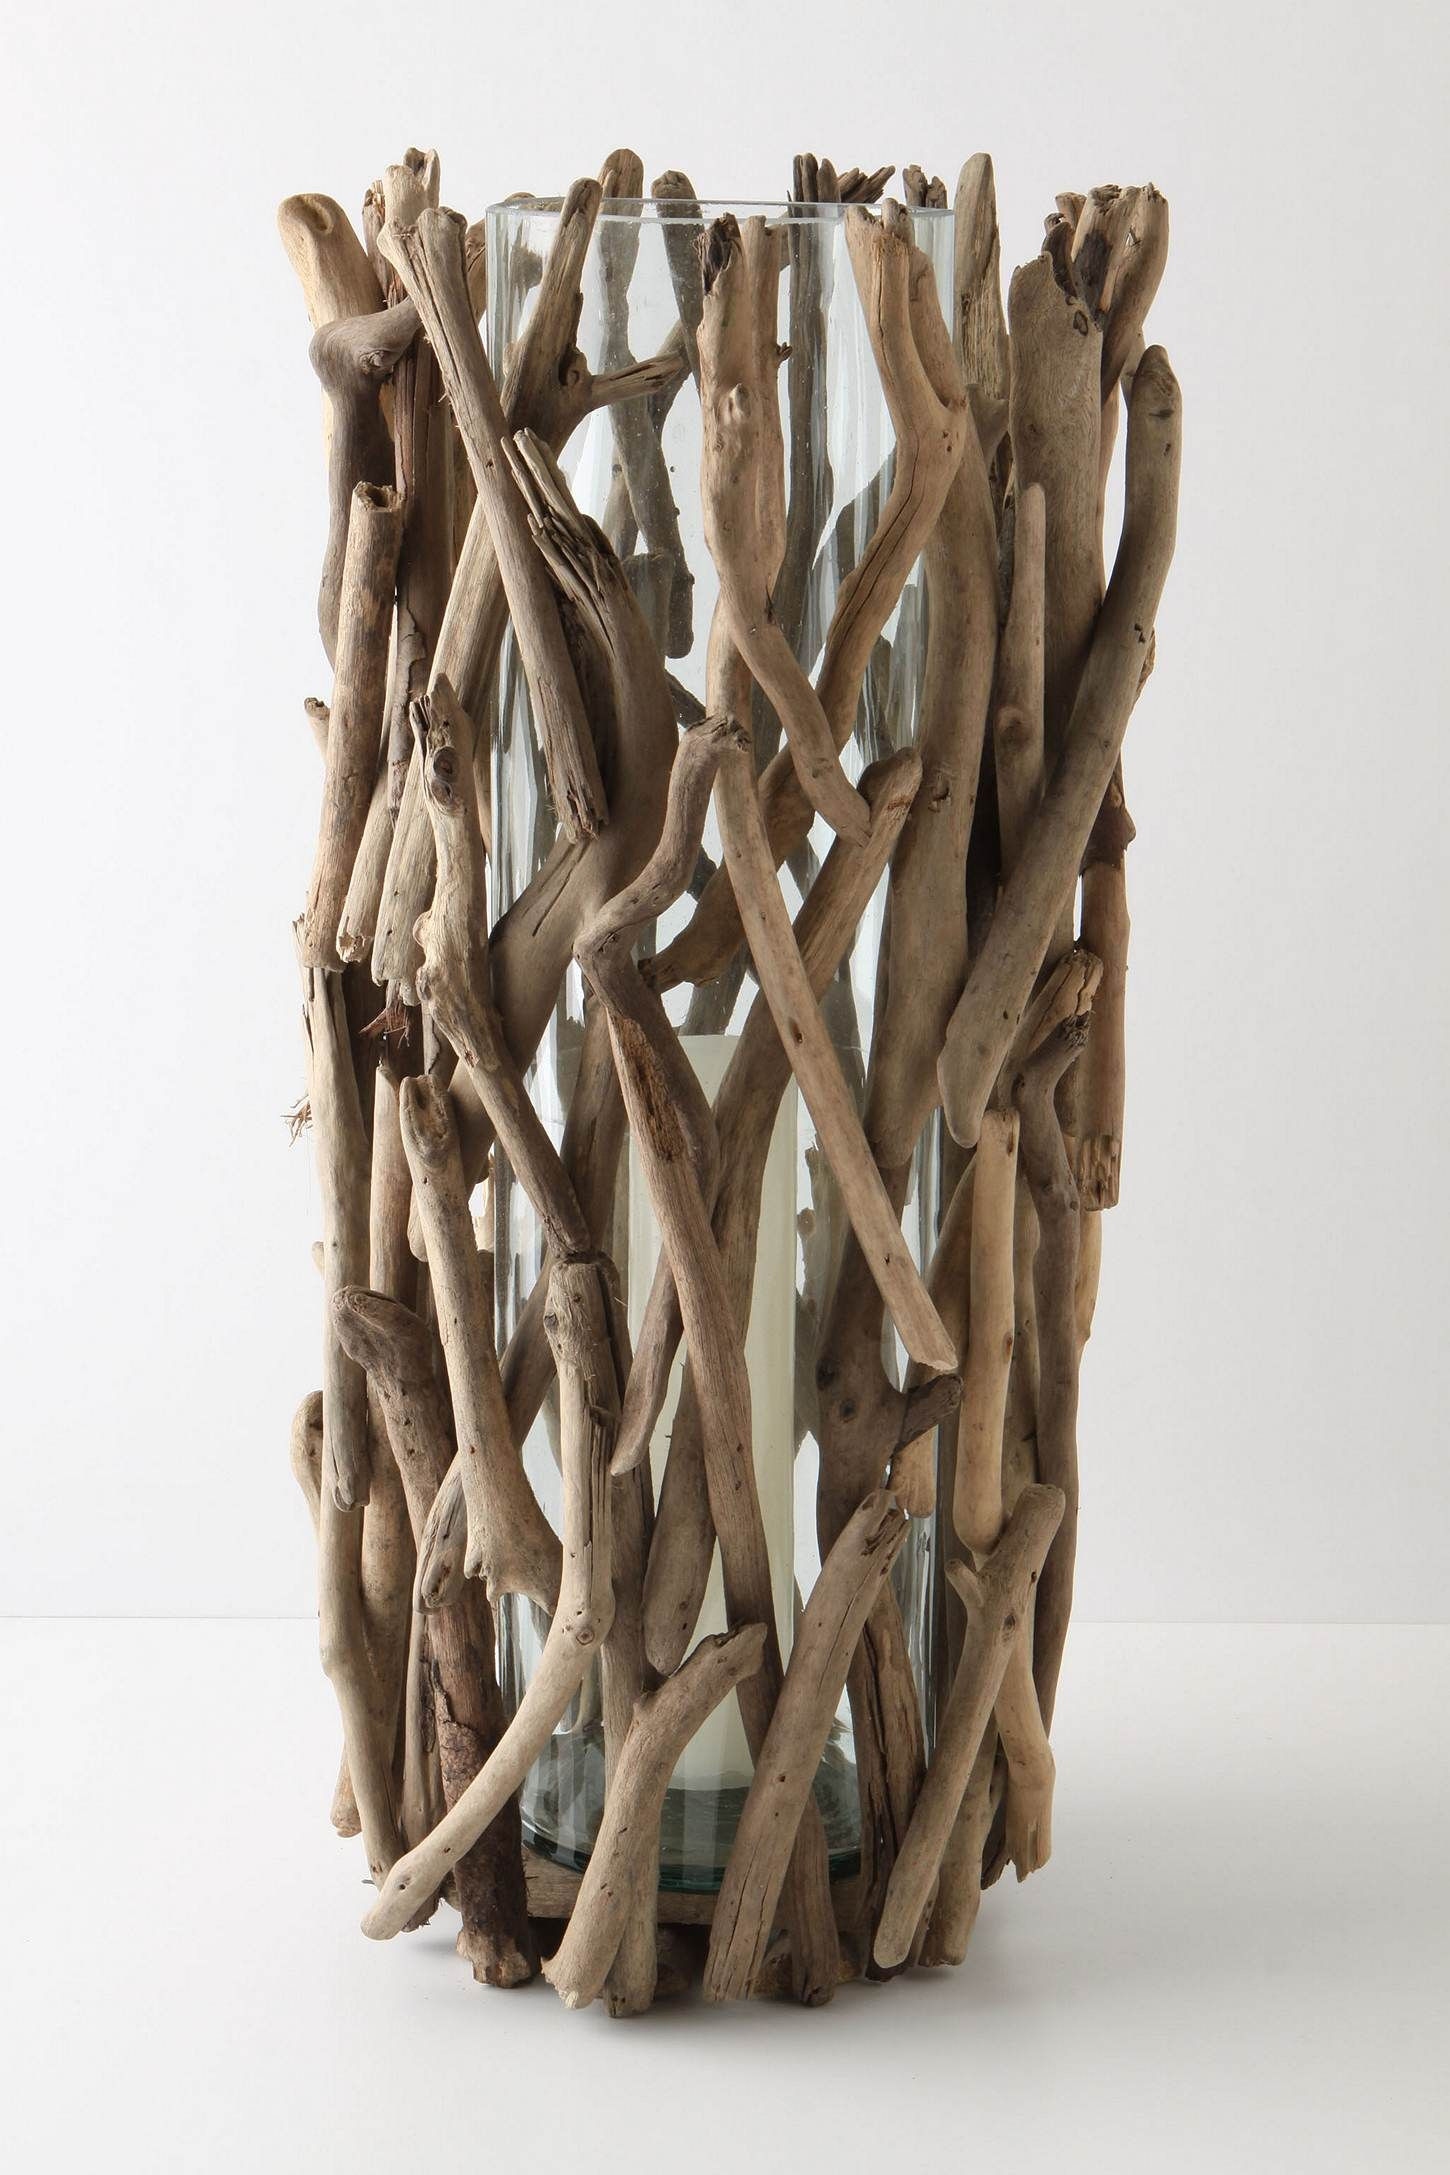 11 Fashionable Decorative Wood Sticks for Vases 2024 free download decorative wood sticks for vases of driftwood hurricane tall well isnt that just nifty pinterest with regard to driftwood hurricane tall 78 place this on your coffee table make your own usin